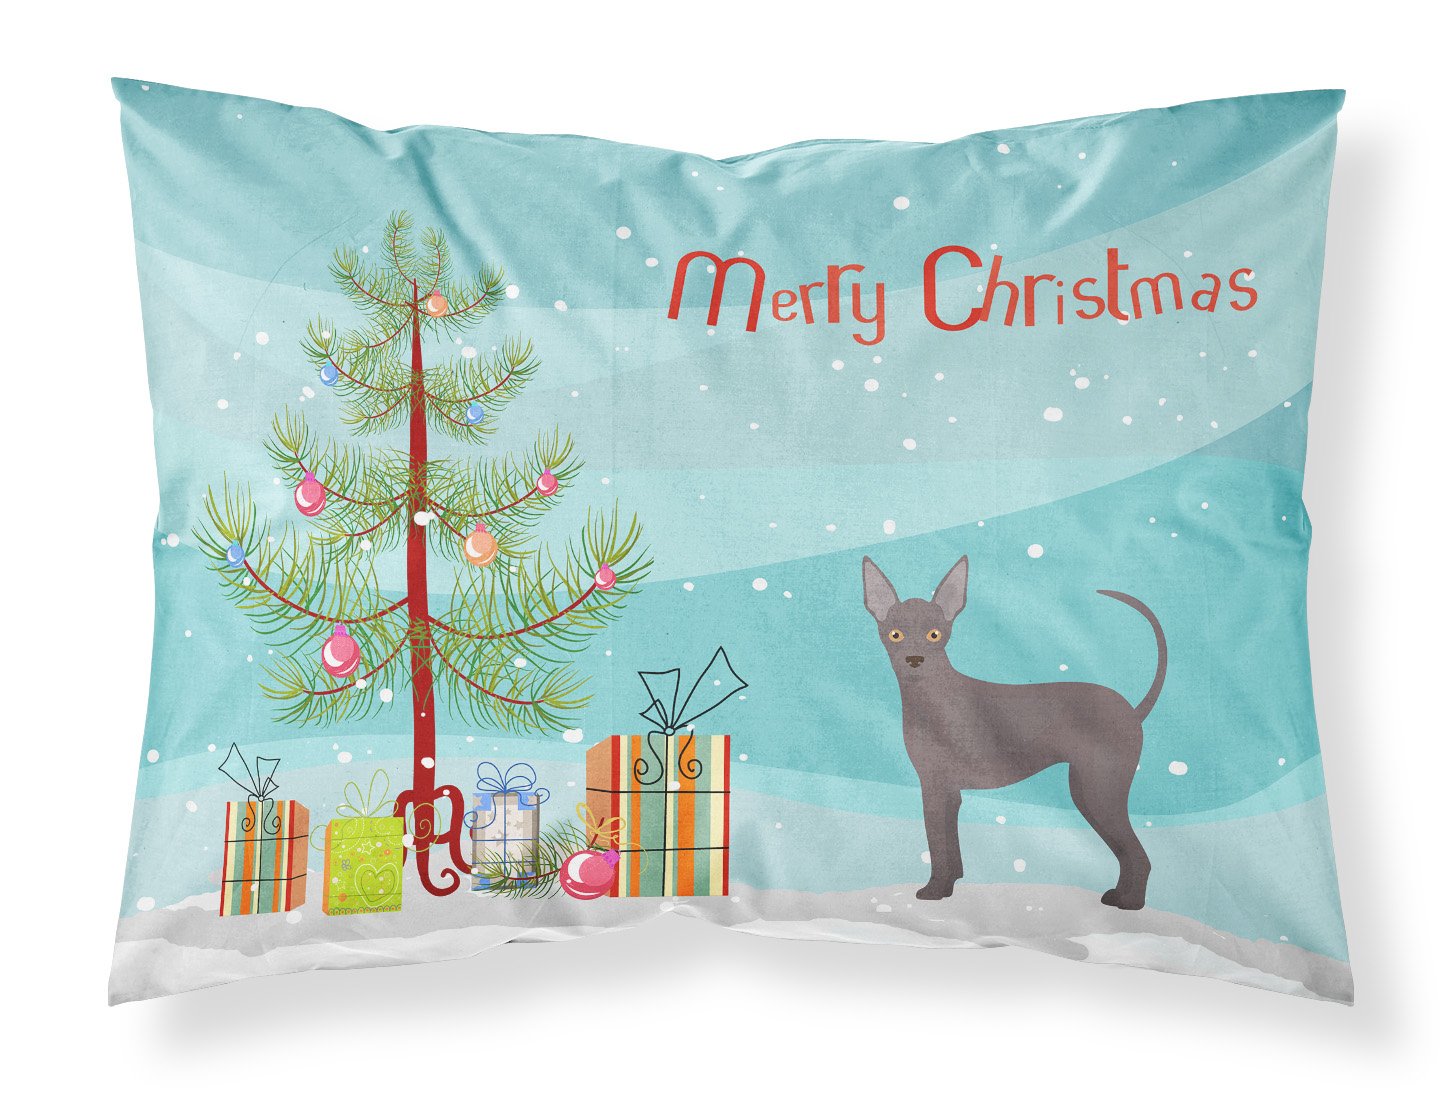 Abyssinian or African Hairless Dog Christmas Tree Fabric Standard Pillowcase CK3438PILLOWCASE by Caroline's Treasures